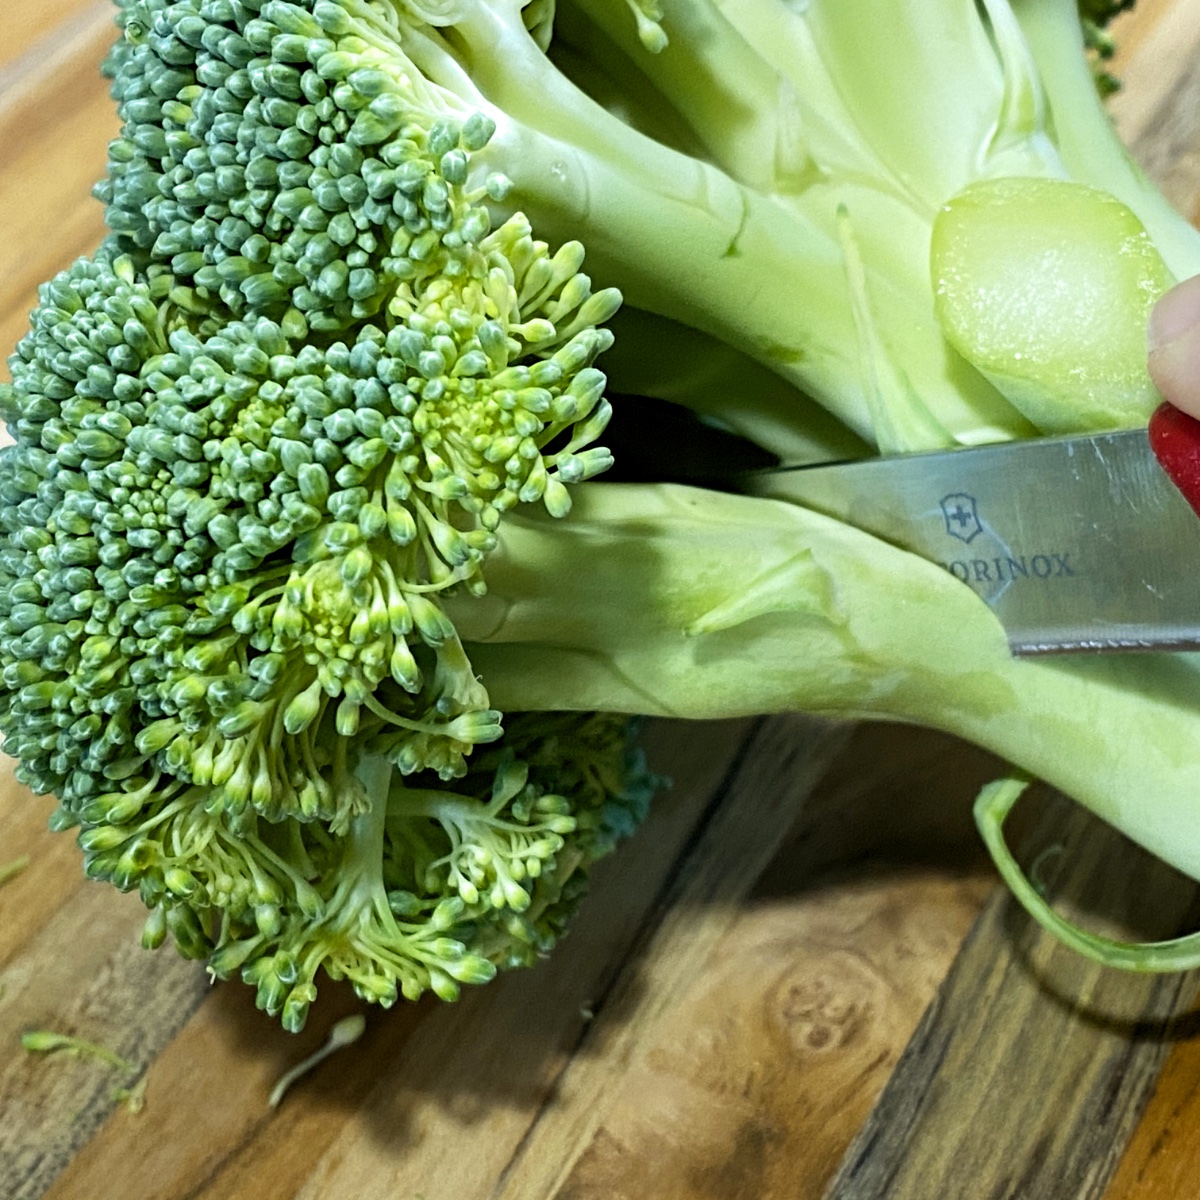 Image of knife showing how to cut broccoli floret from the stem.